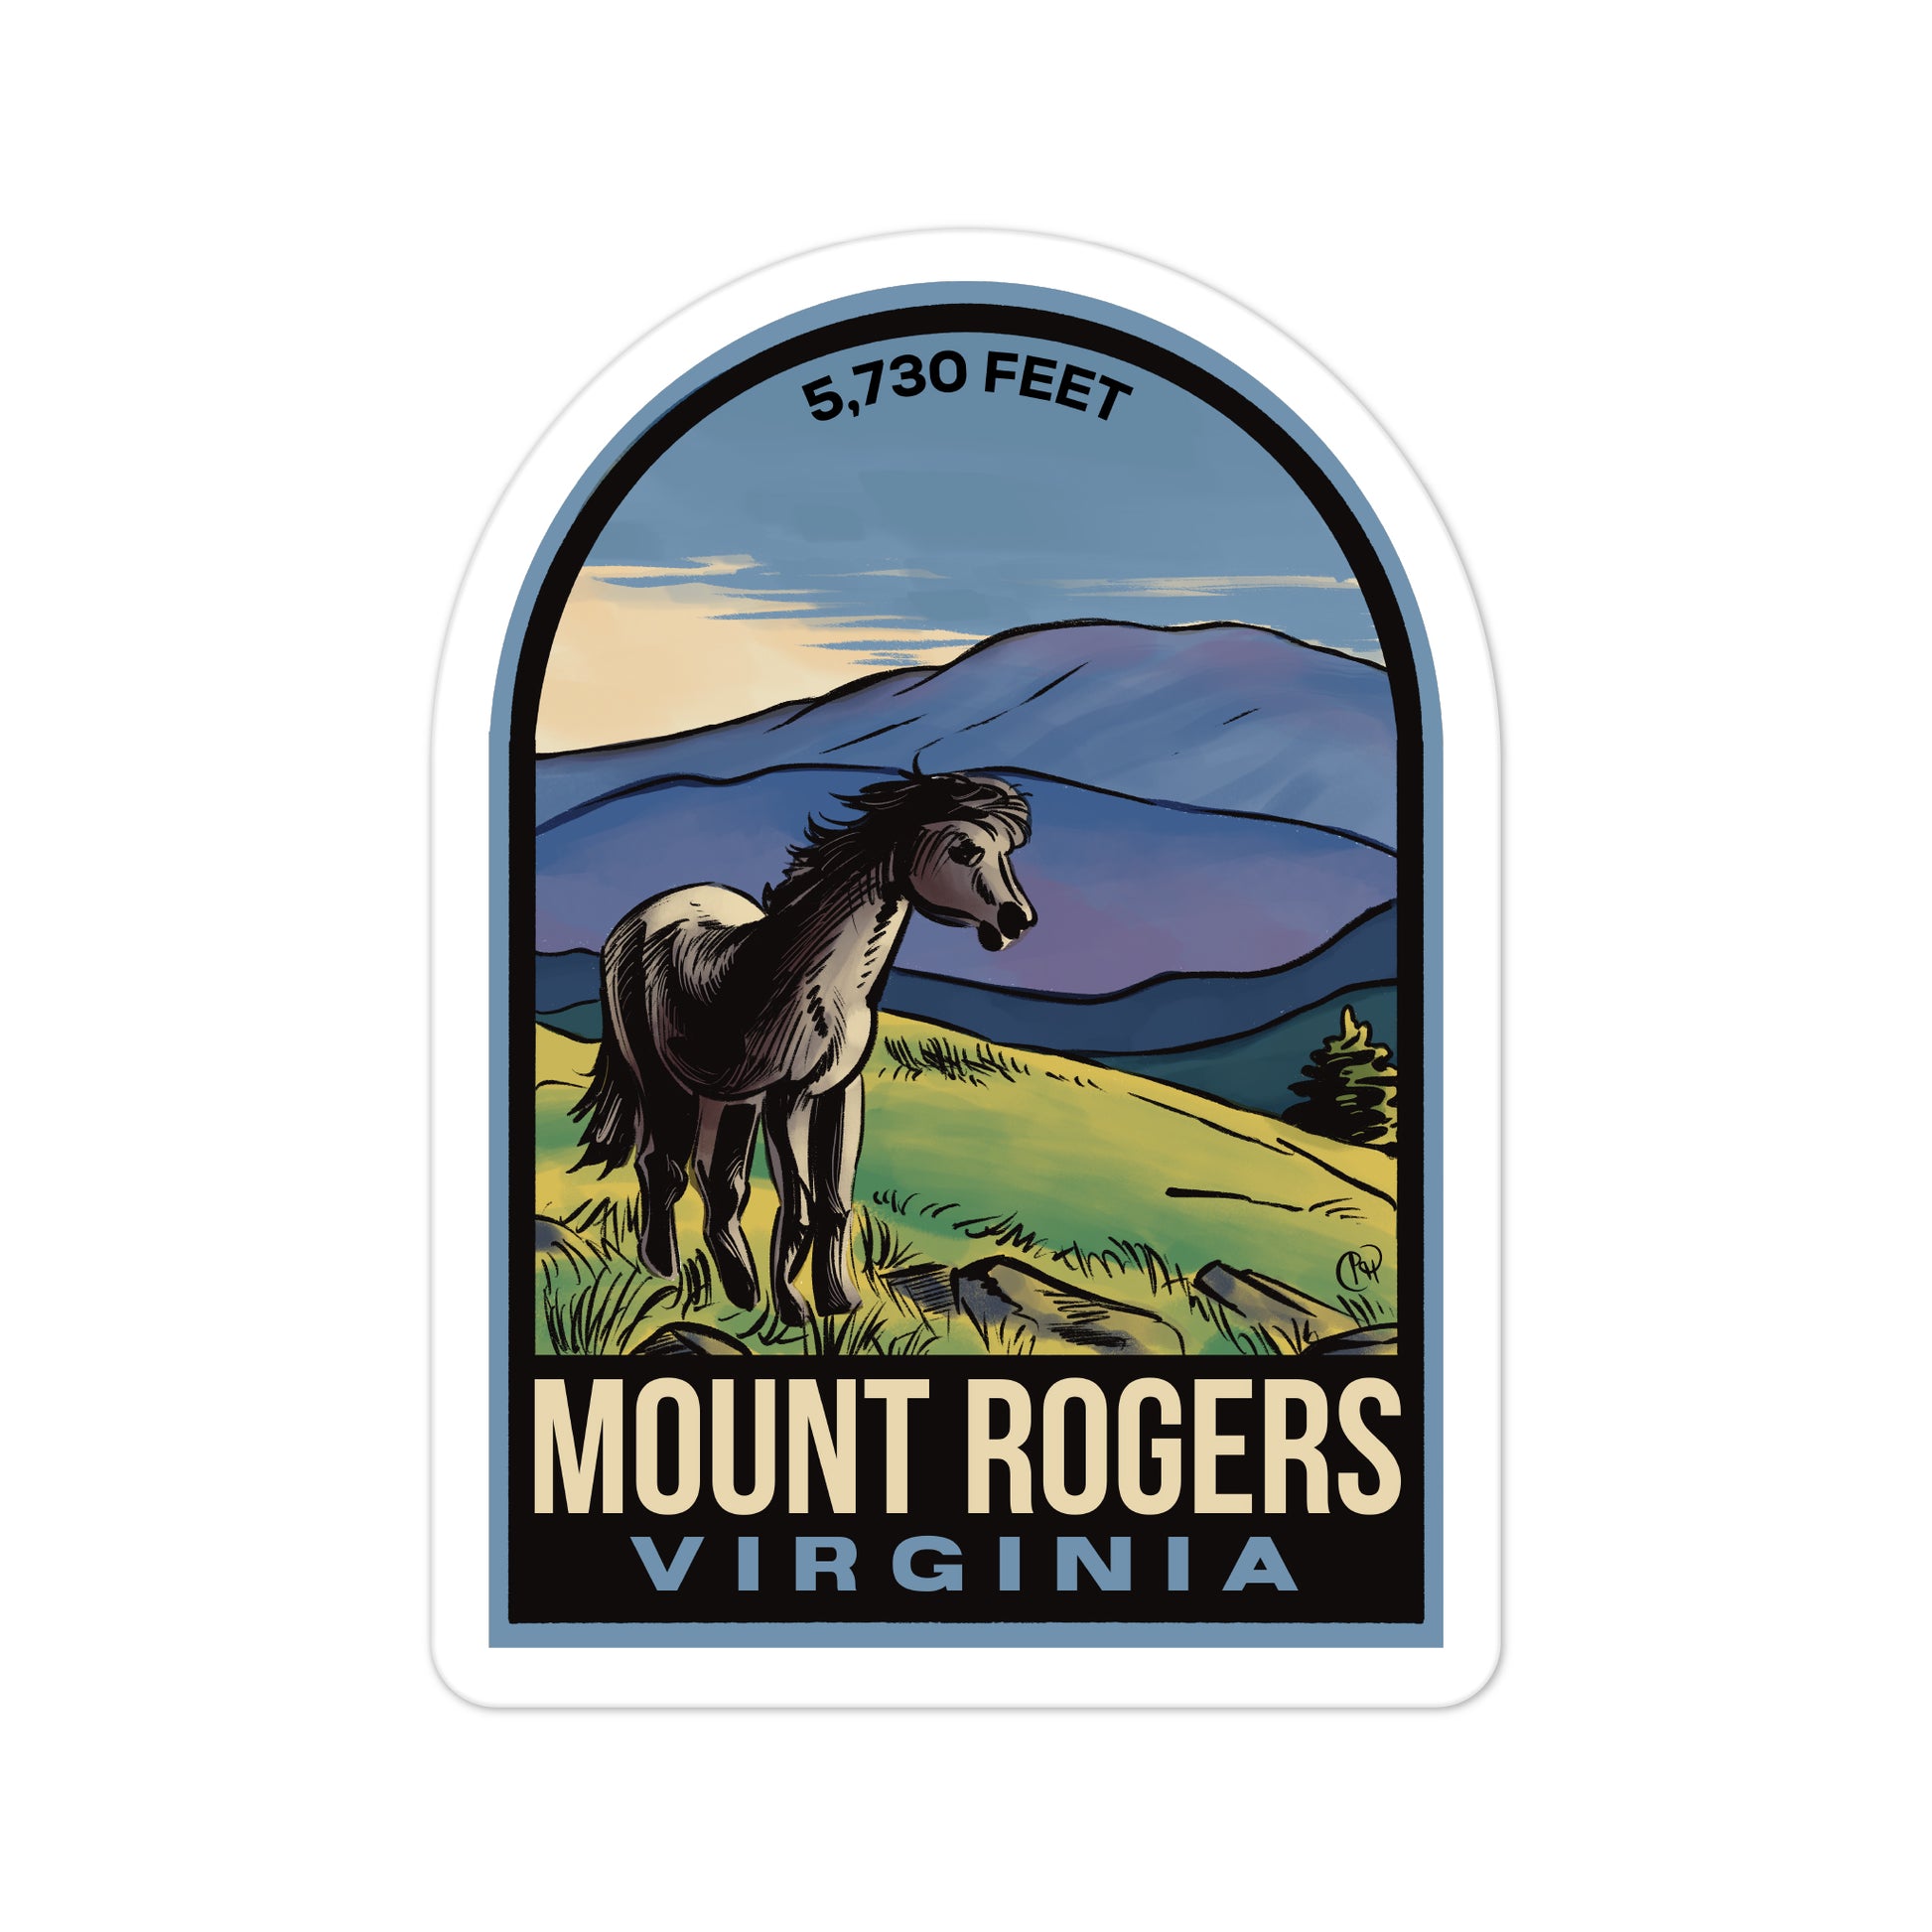 A sticker of Mount Rogers Virginia